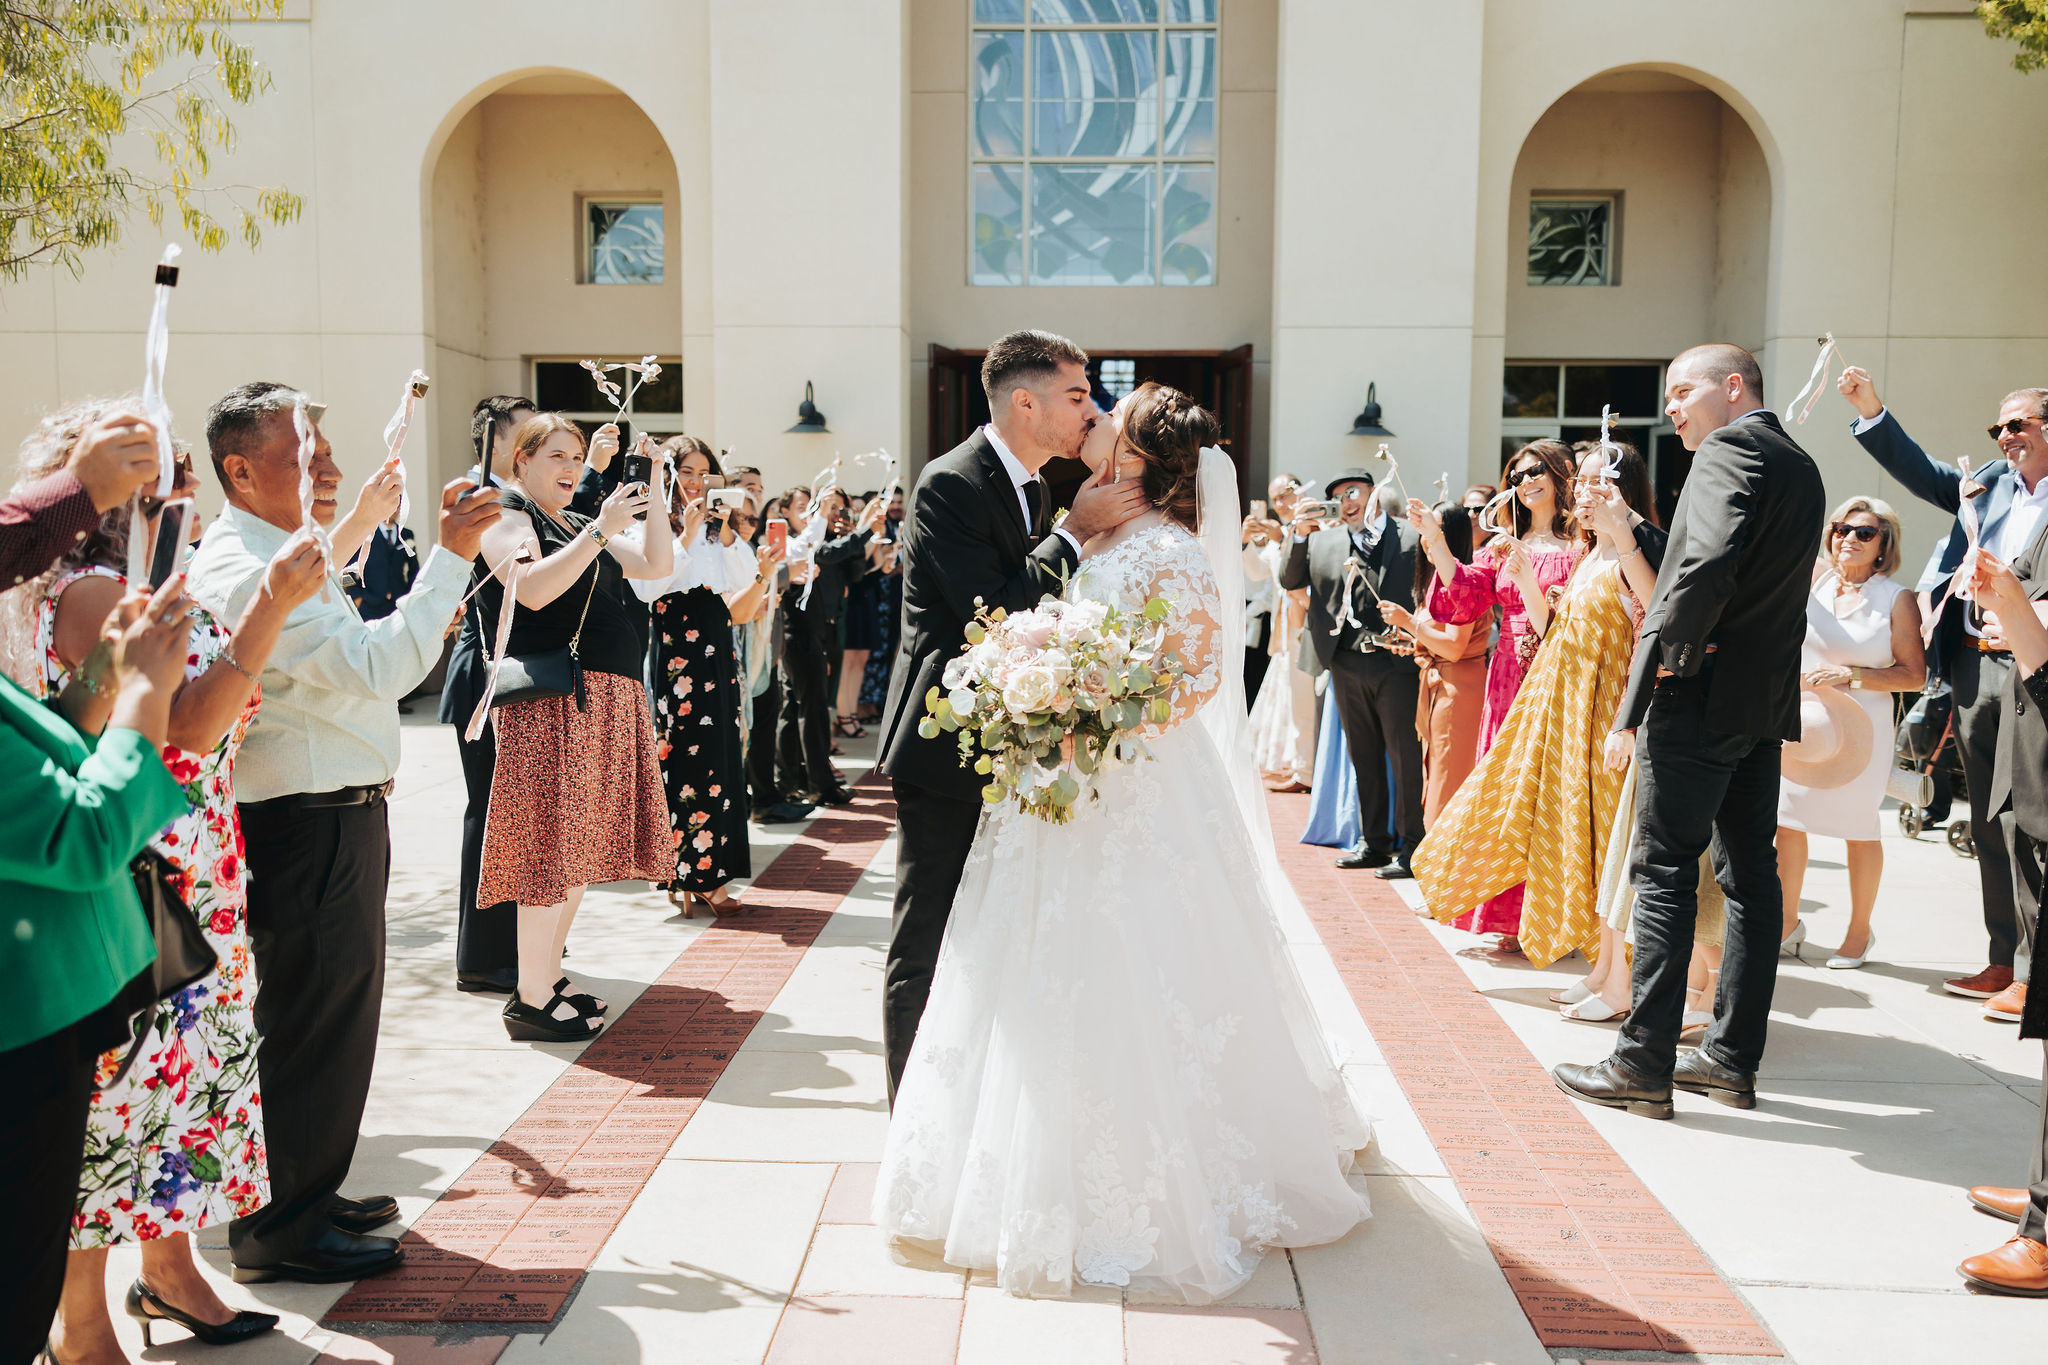 bride and groom exiting church after wedding ceremony in temecula california